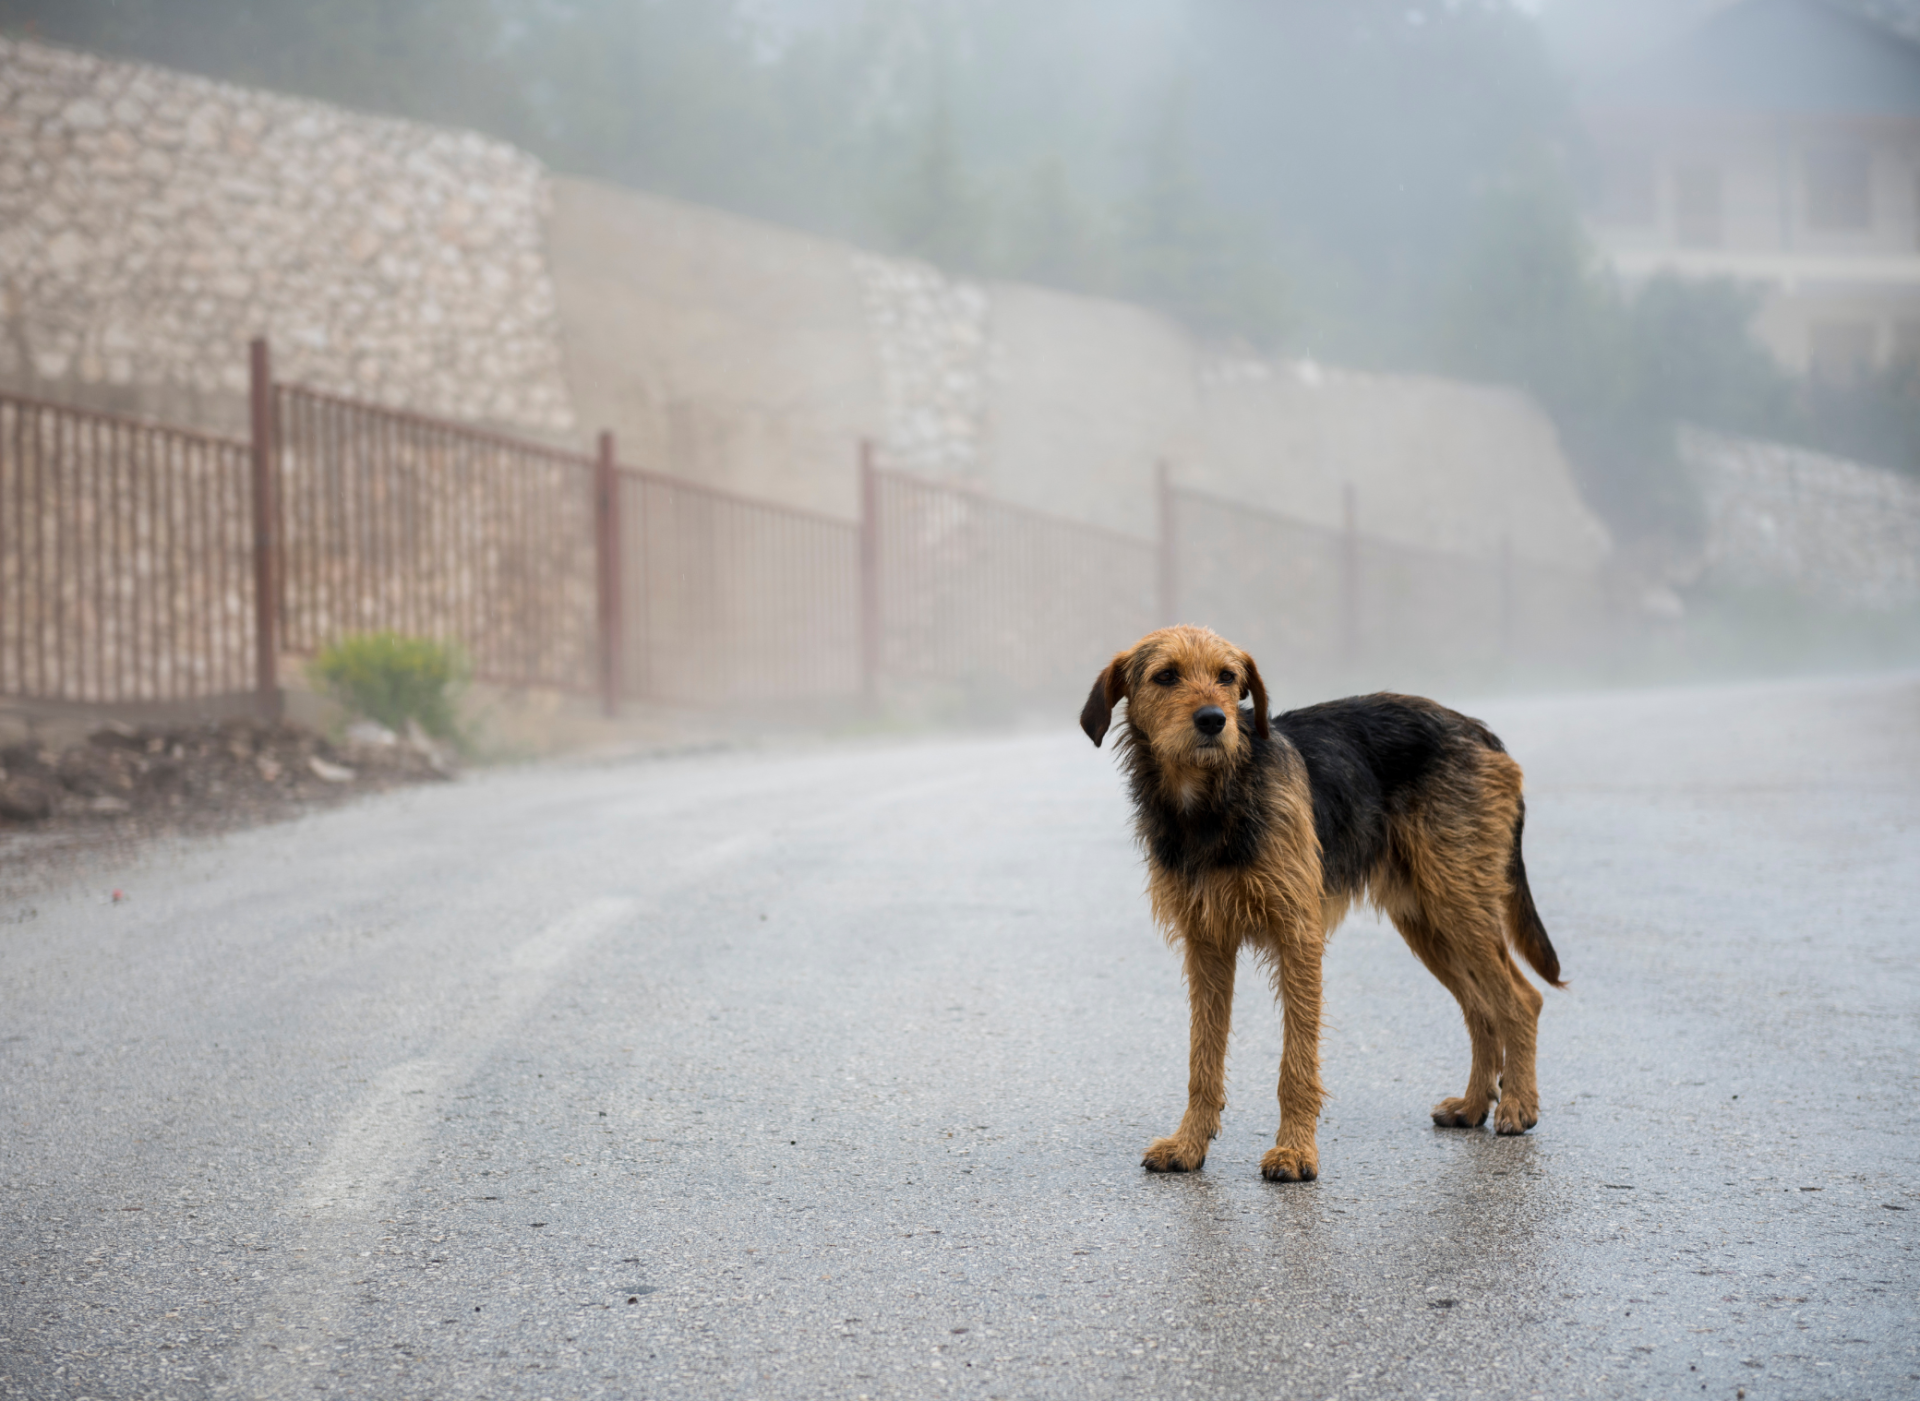 Stray dog standing in the middle of the a foggy road with no people around it.